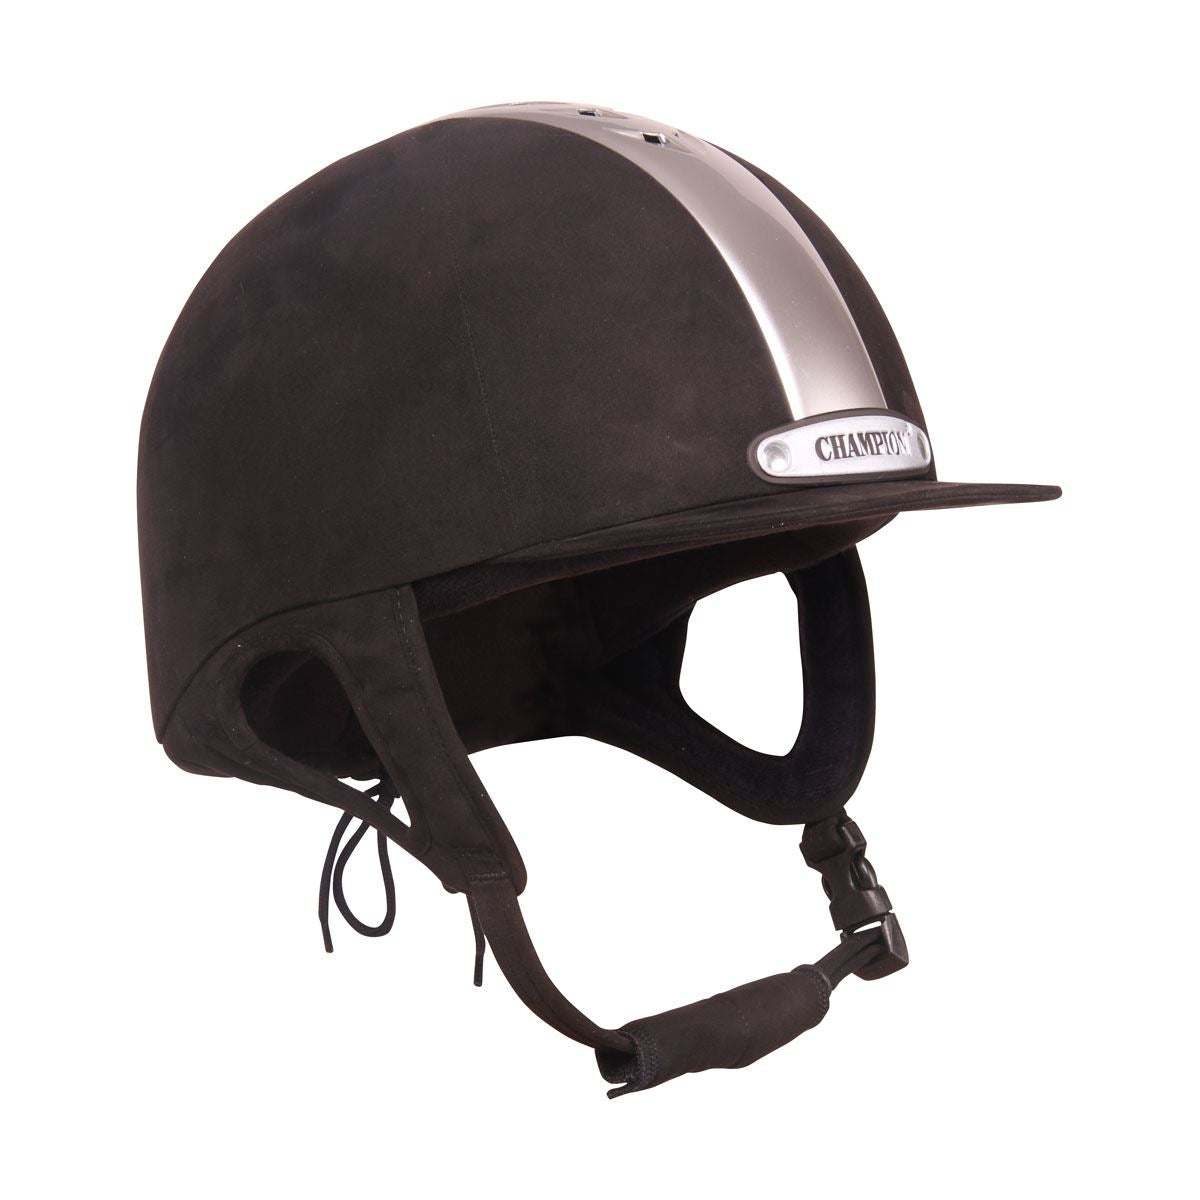 Champion Ventair Hat - Just Horse Riders